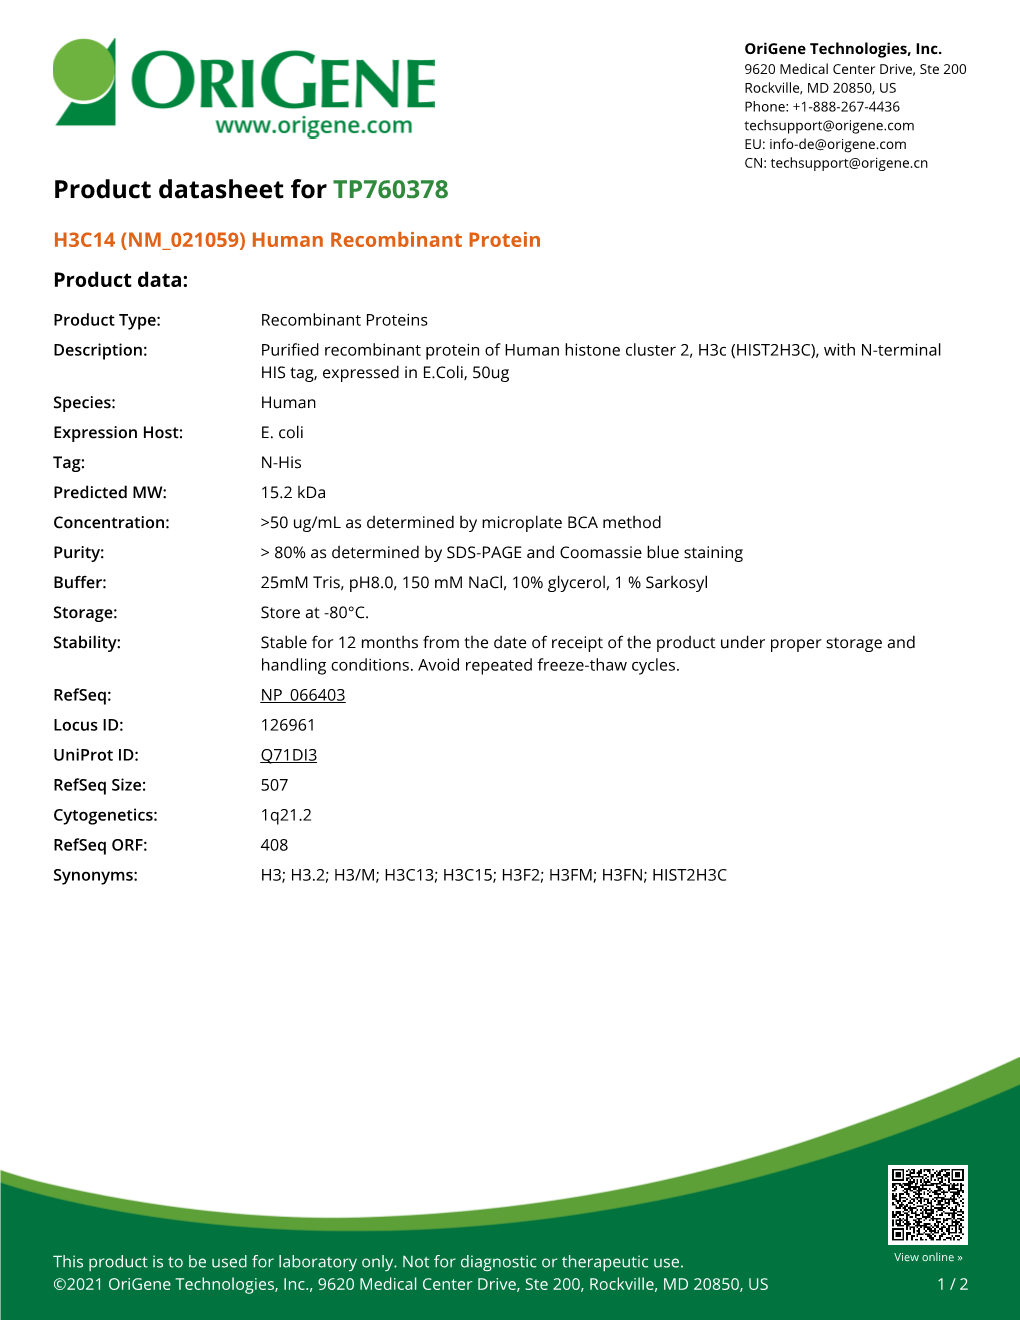 Human Recombinant Protein – TP760378